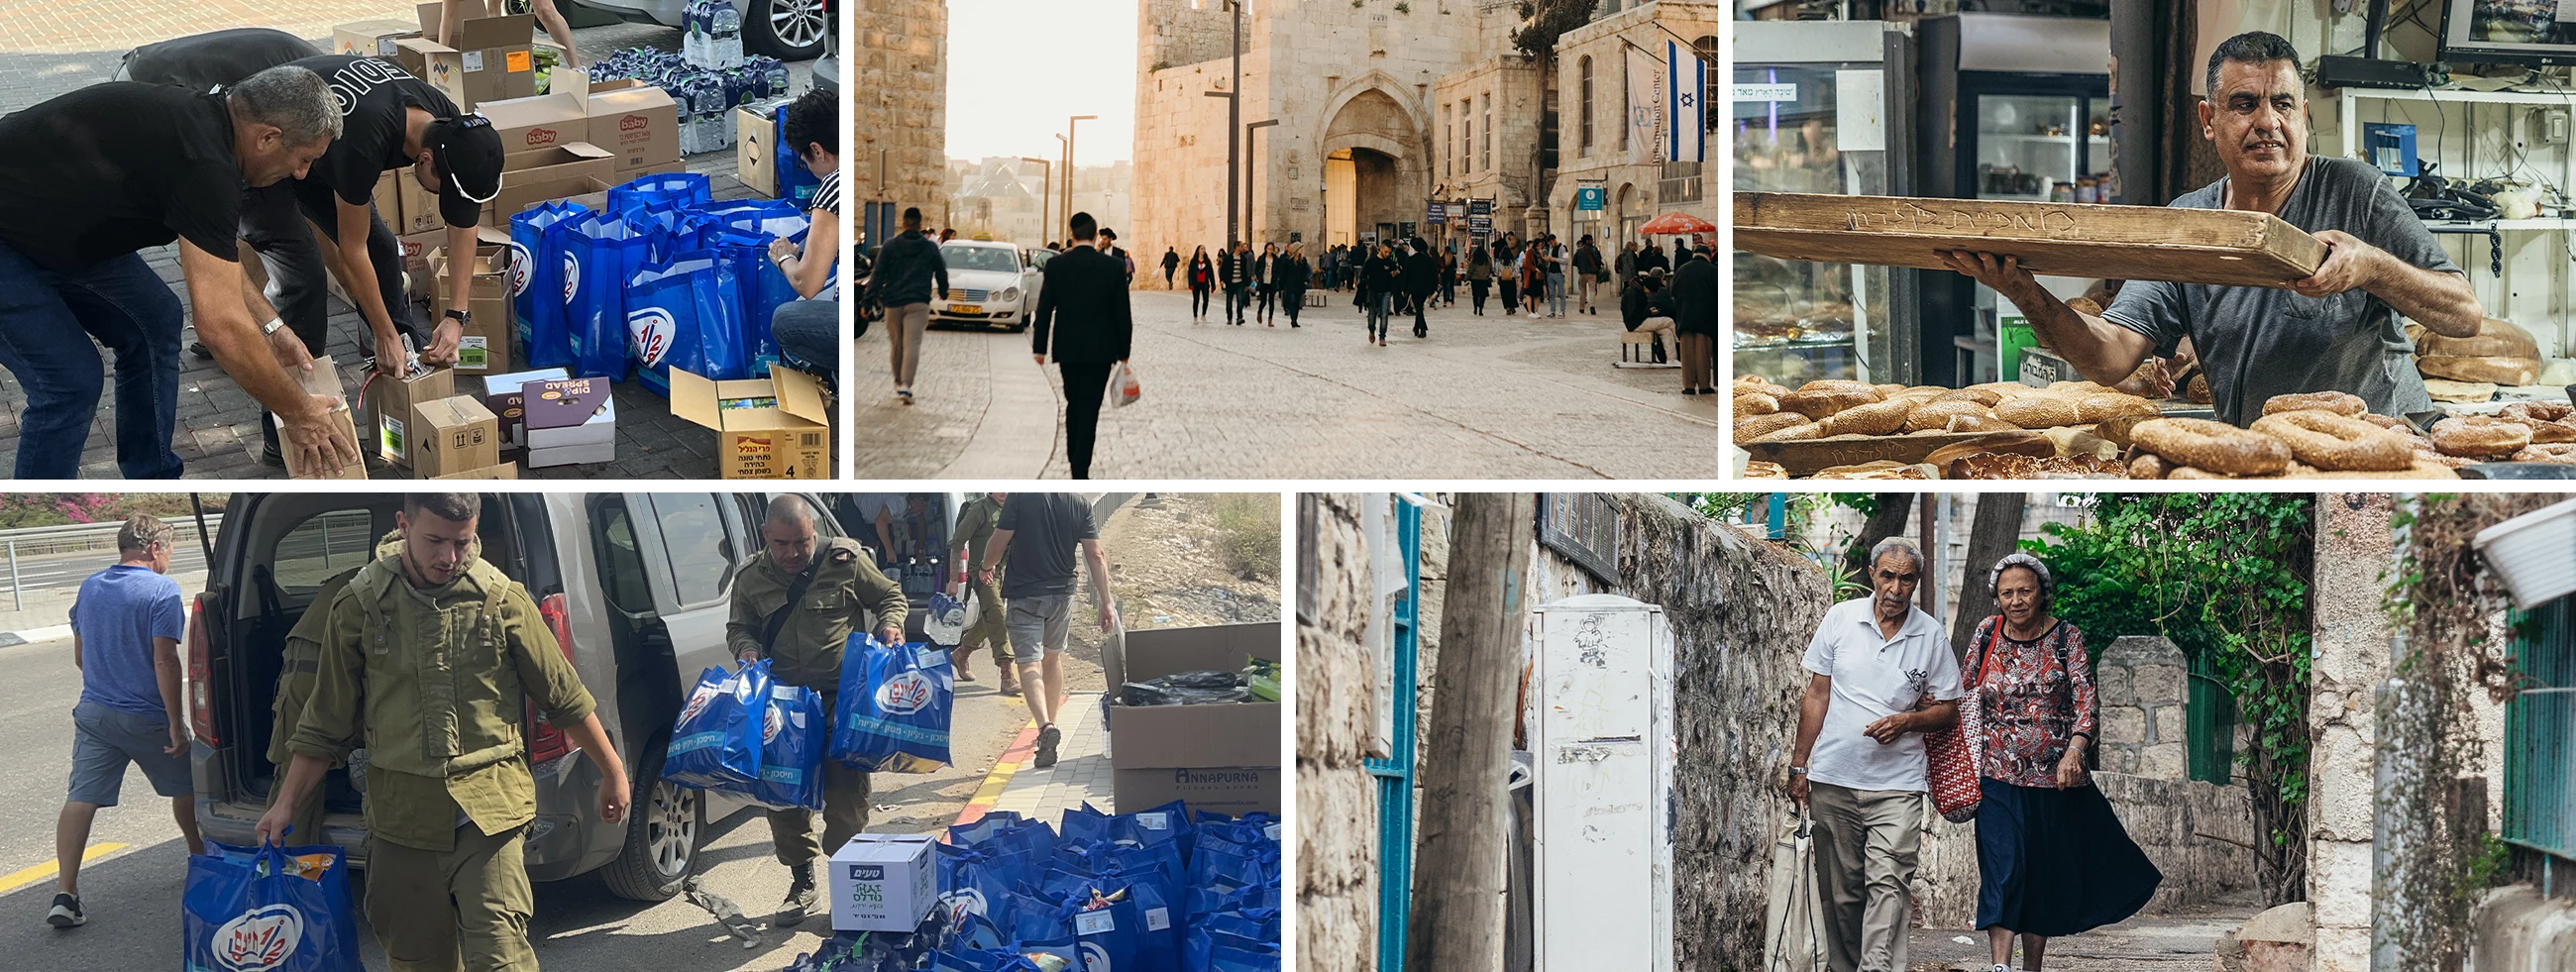 A grid of 5 photos of people smiling in Israel, taking tours, playing guitar, and eating food.